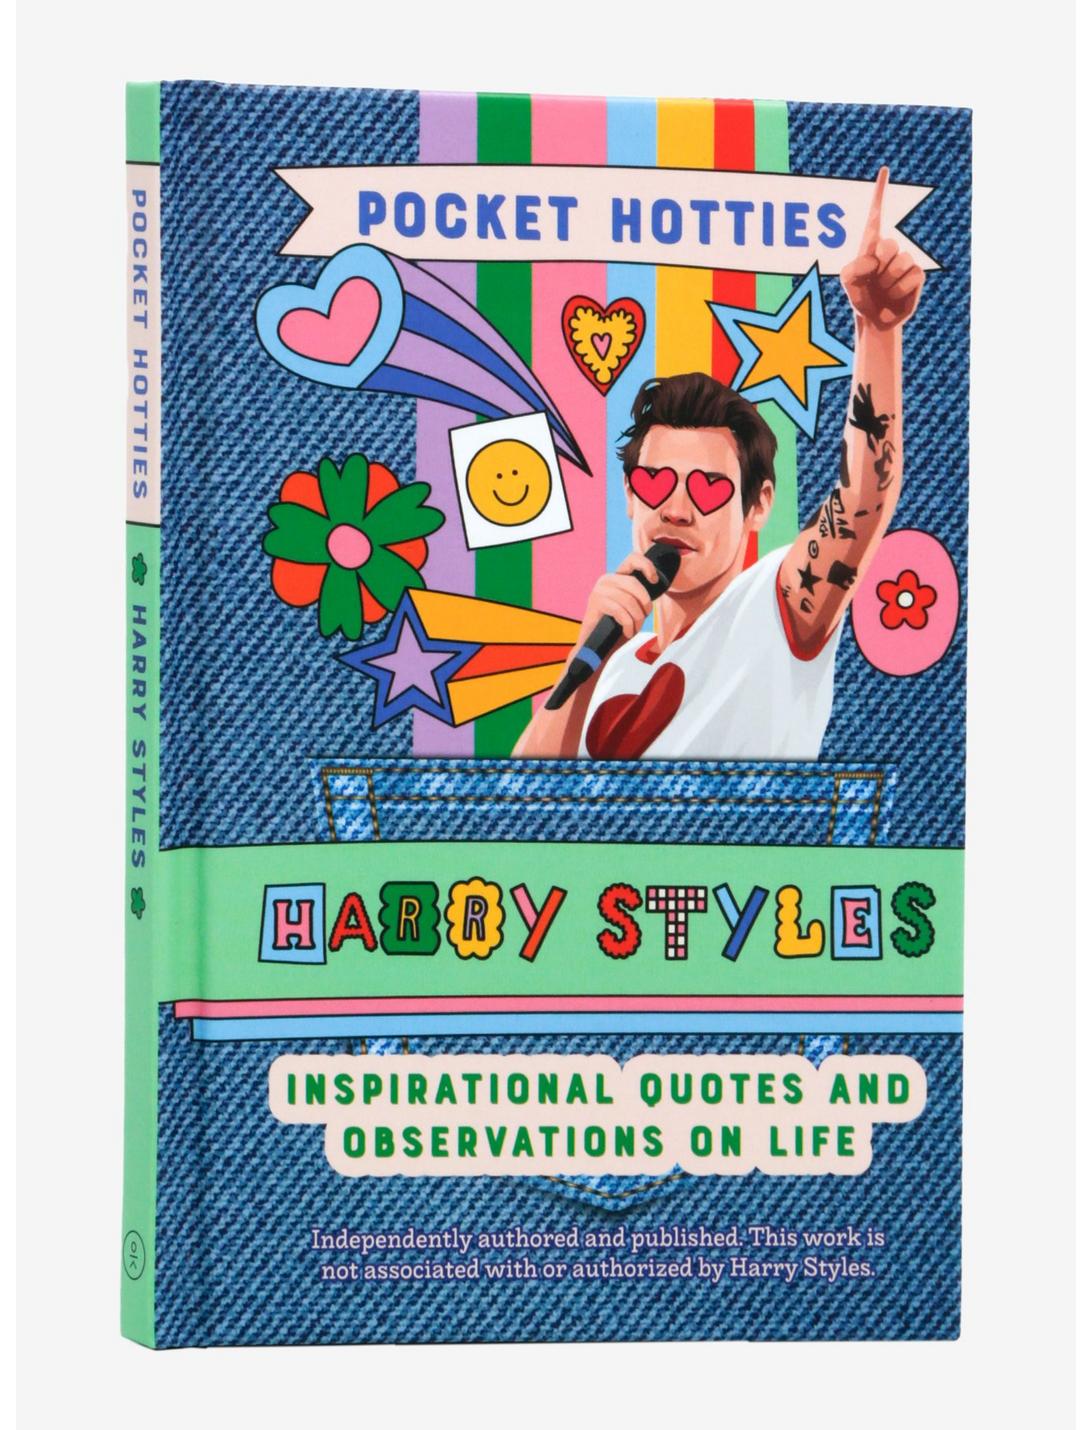 Pocket Hotties: Harry Styles: Inspirational Quotes And Observations On Life Book, , hi-res